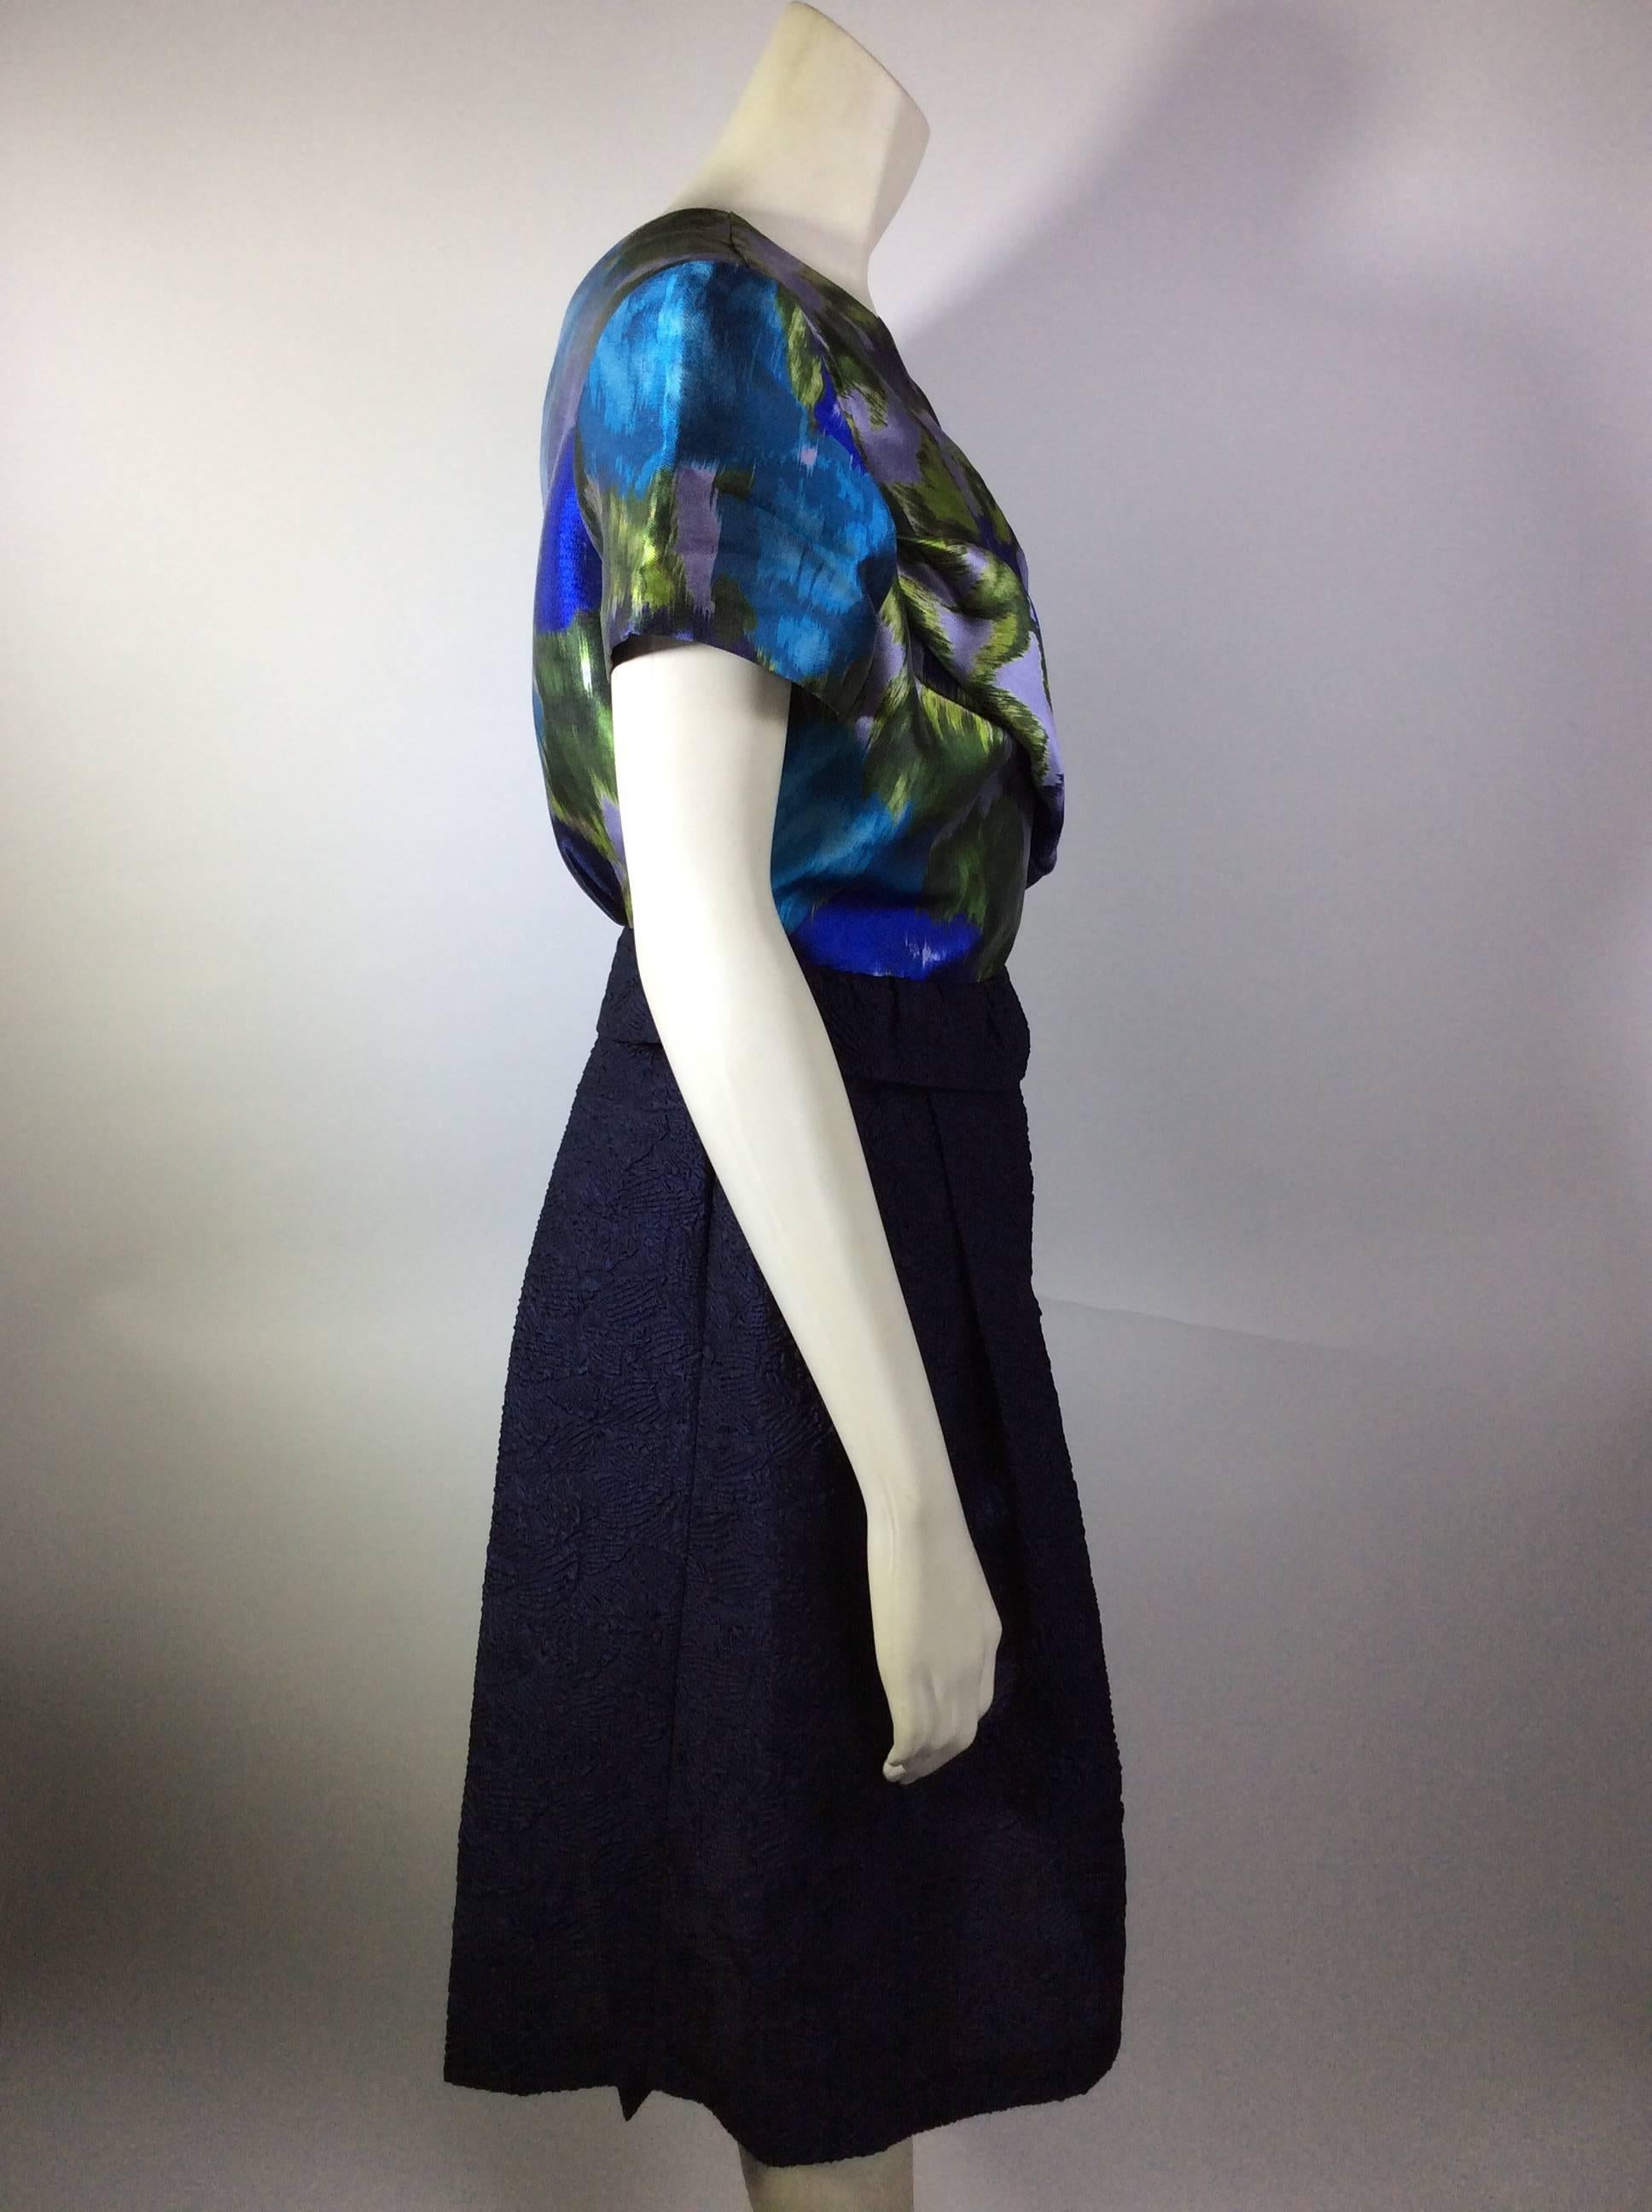 Floral Print and Navy Cross Back A-line Dress
Ruched detail on bodice
Crossed back with hook and eye closure on left side of dress
Folded over navy belt detail on skirt
Features cap sleeves
Size 12